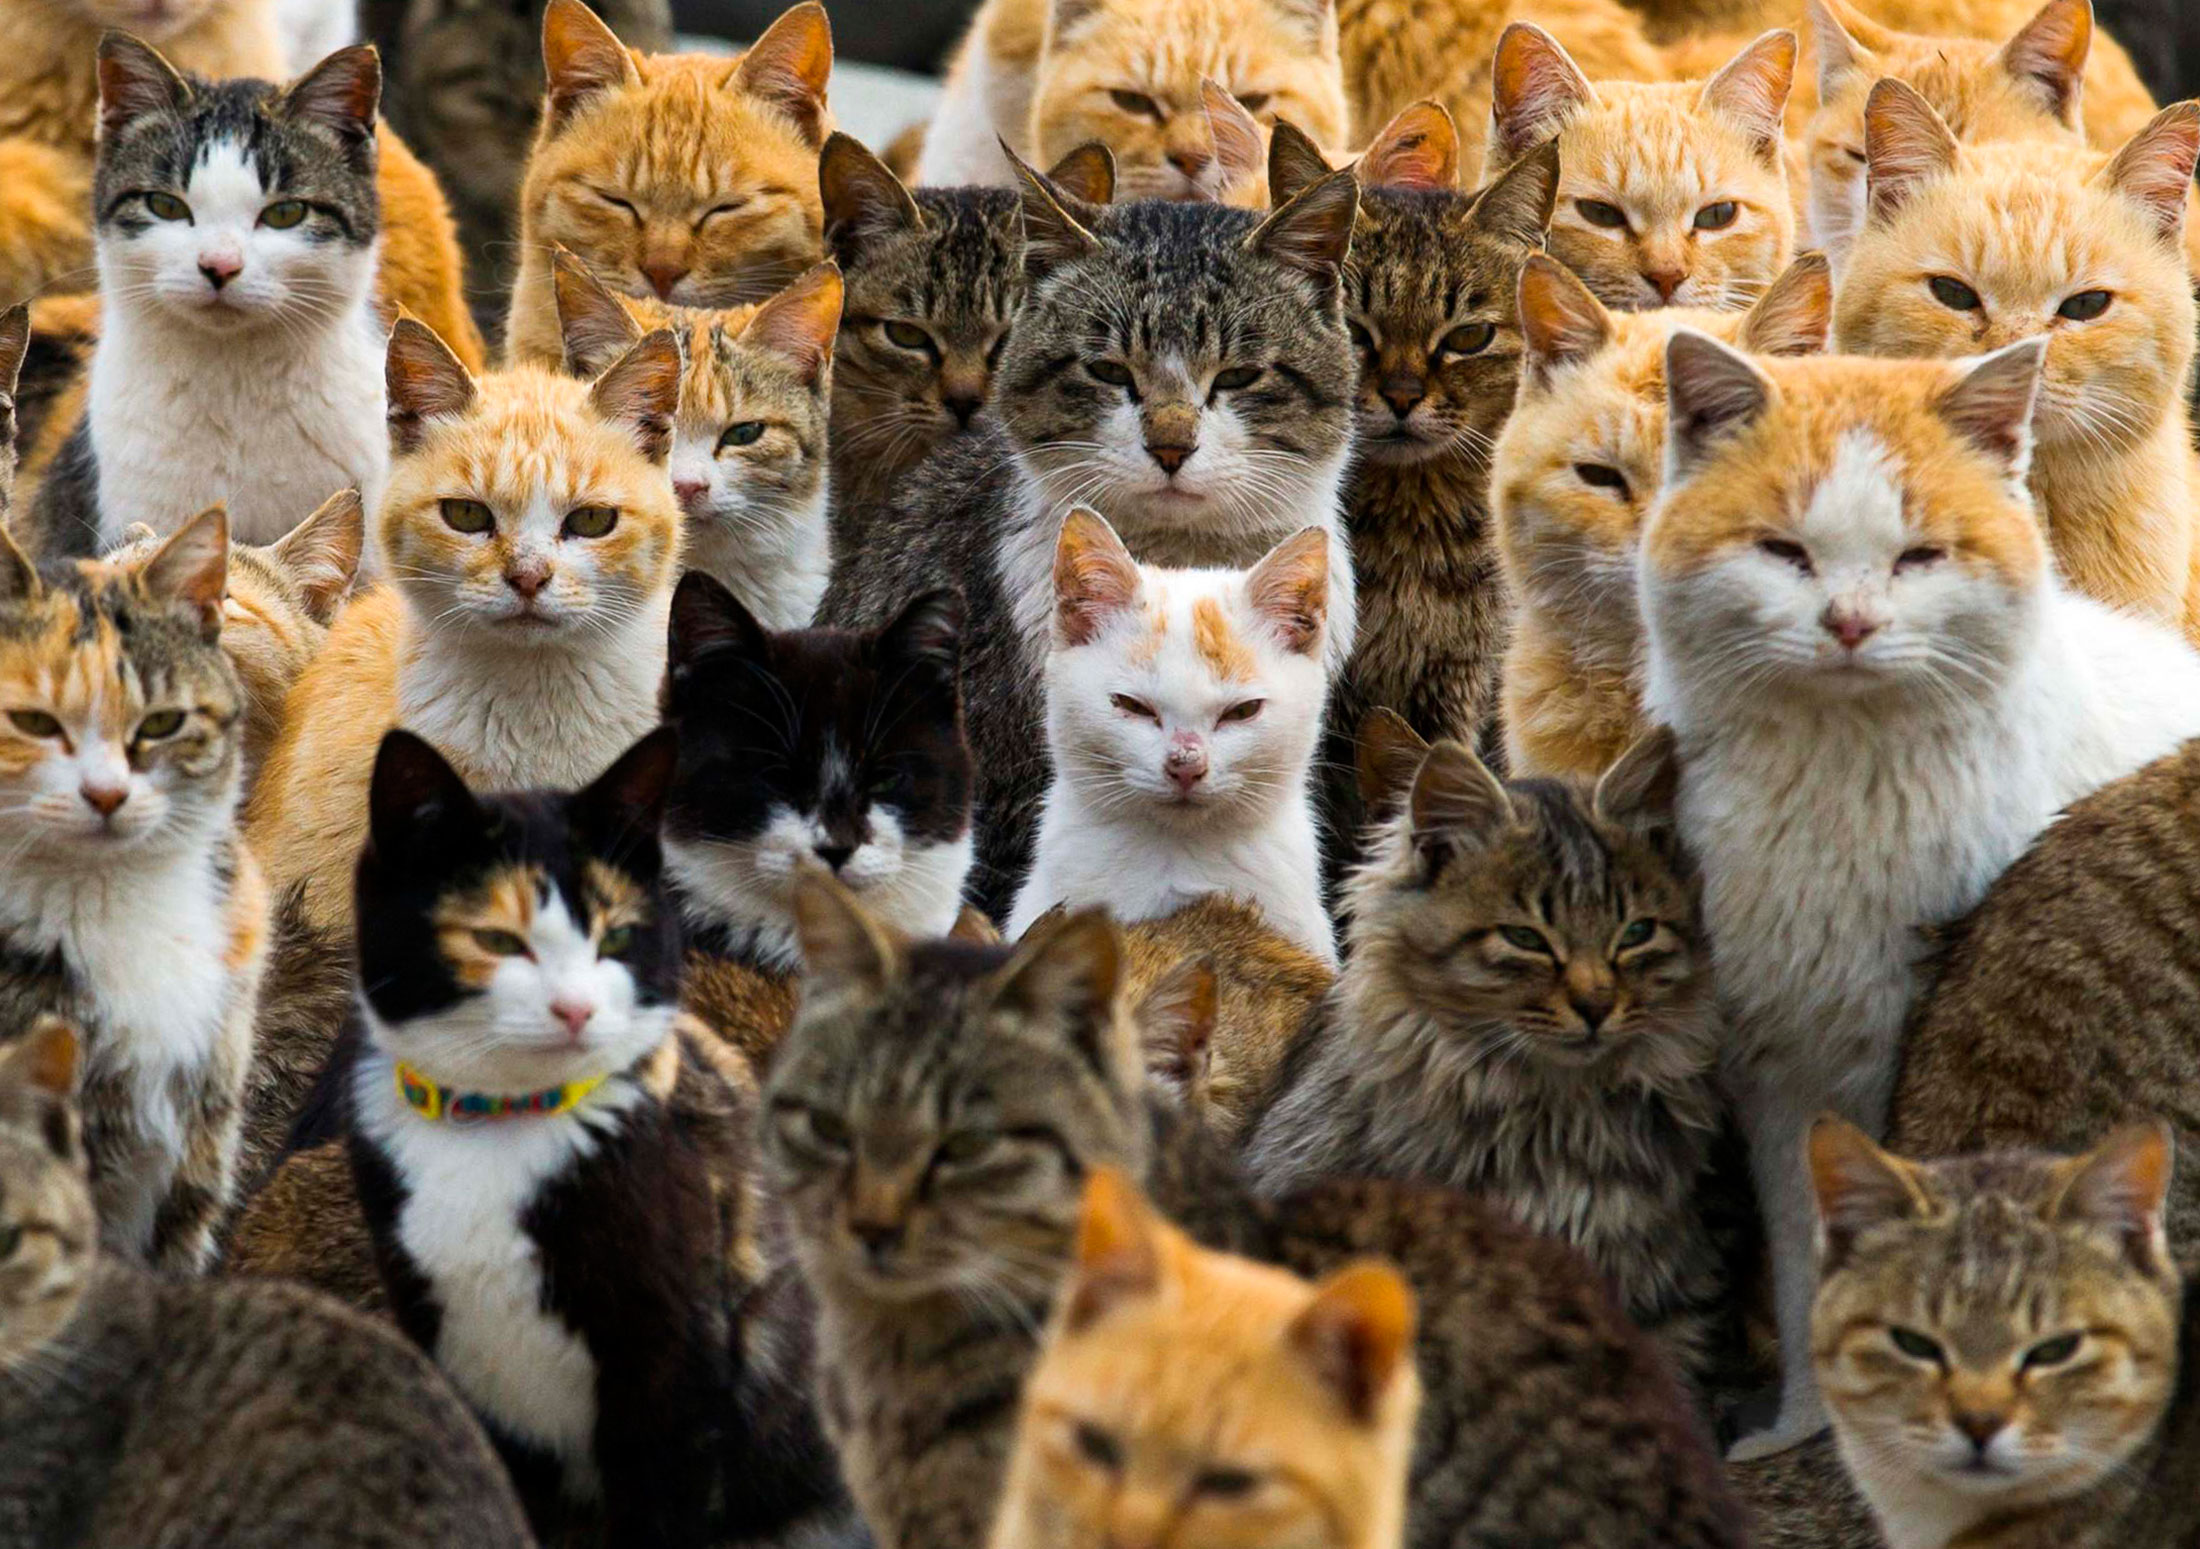 Cats crowd the harbor on Aoshima Island in the Ehime prefecture in southern Japan, Feb. 25, 2015. An army of cats rules the remote island in southern Japan, curling up in abandoned houses or strutting about in a fishing village that is overrun with felines outnumbering humans six to one.